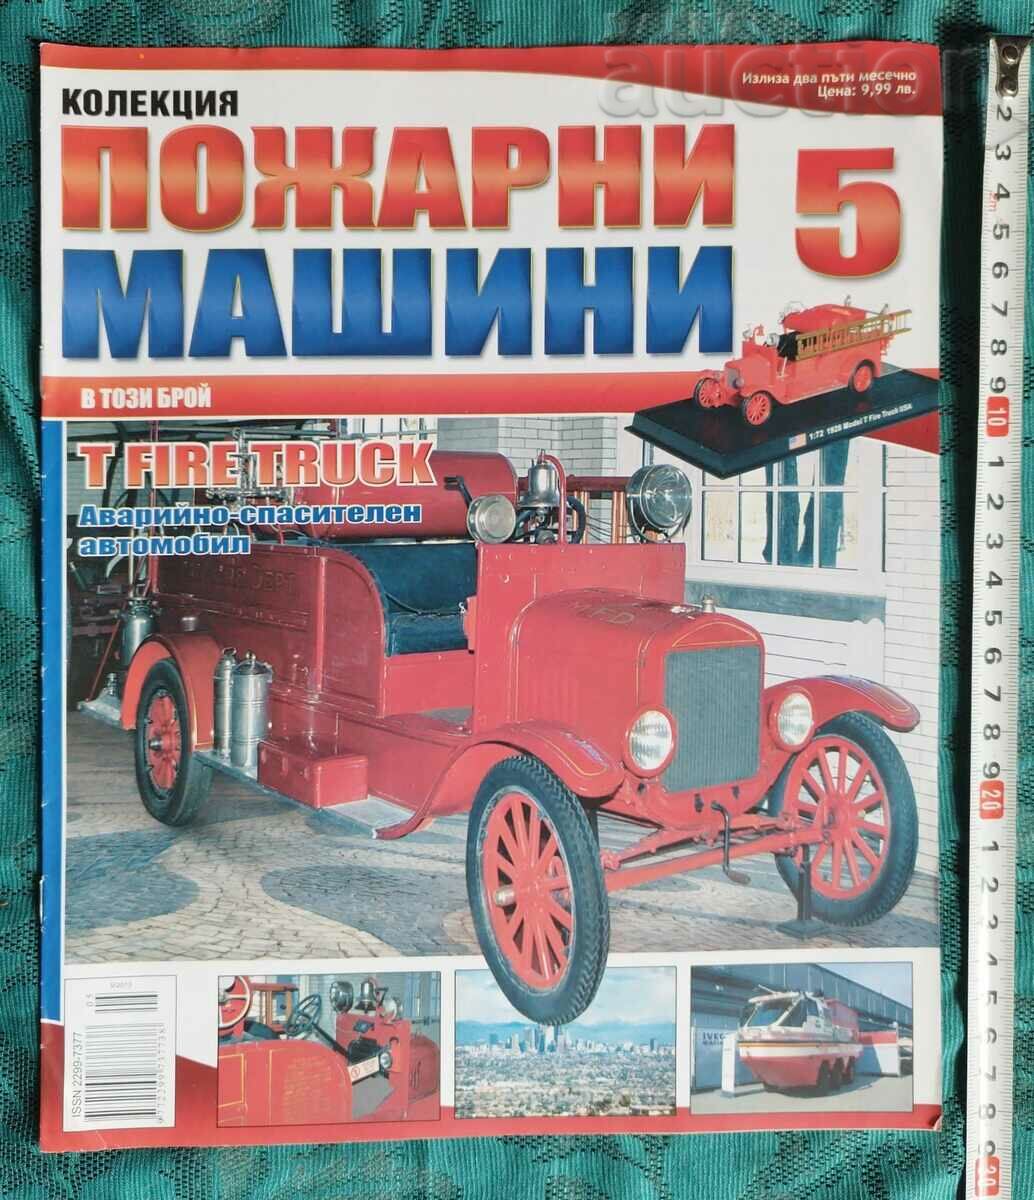 FIRE TRUCK COLLECTION 5 - IN THIS ISSUE & TFIRE TRUCK ...